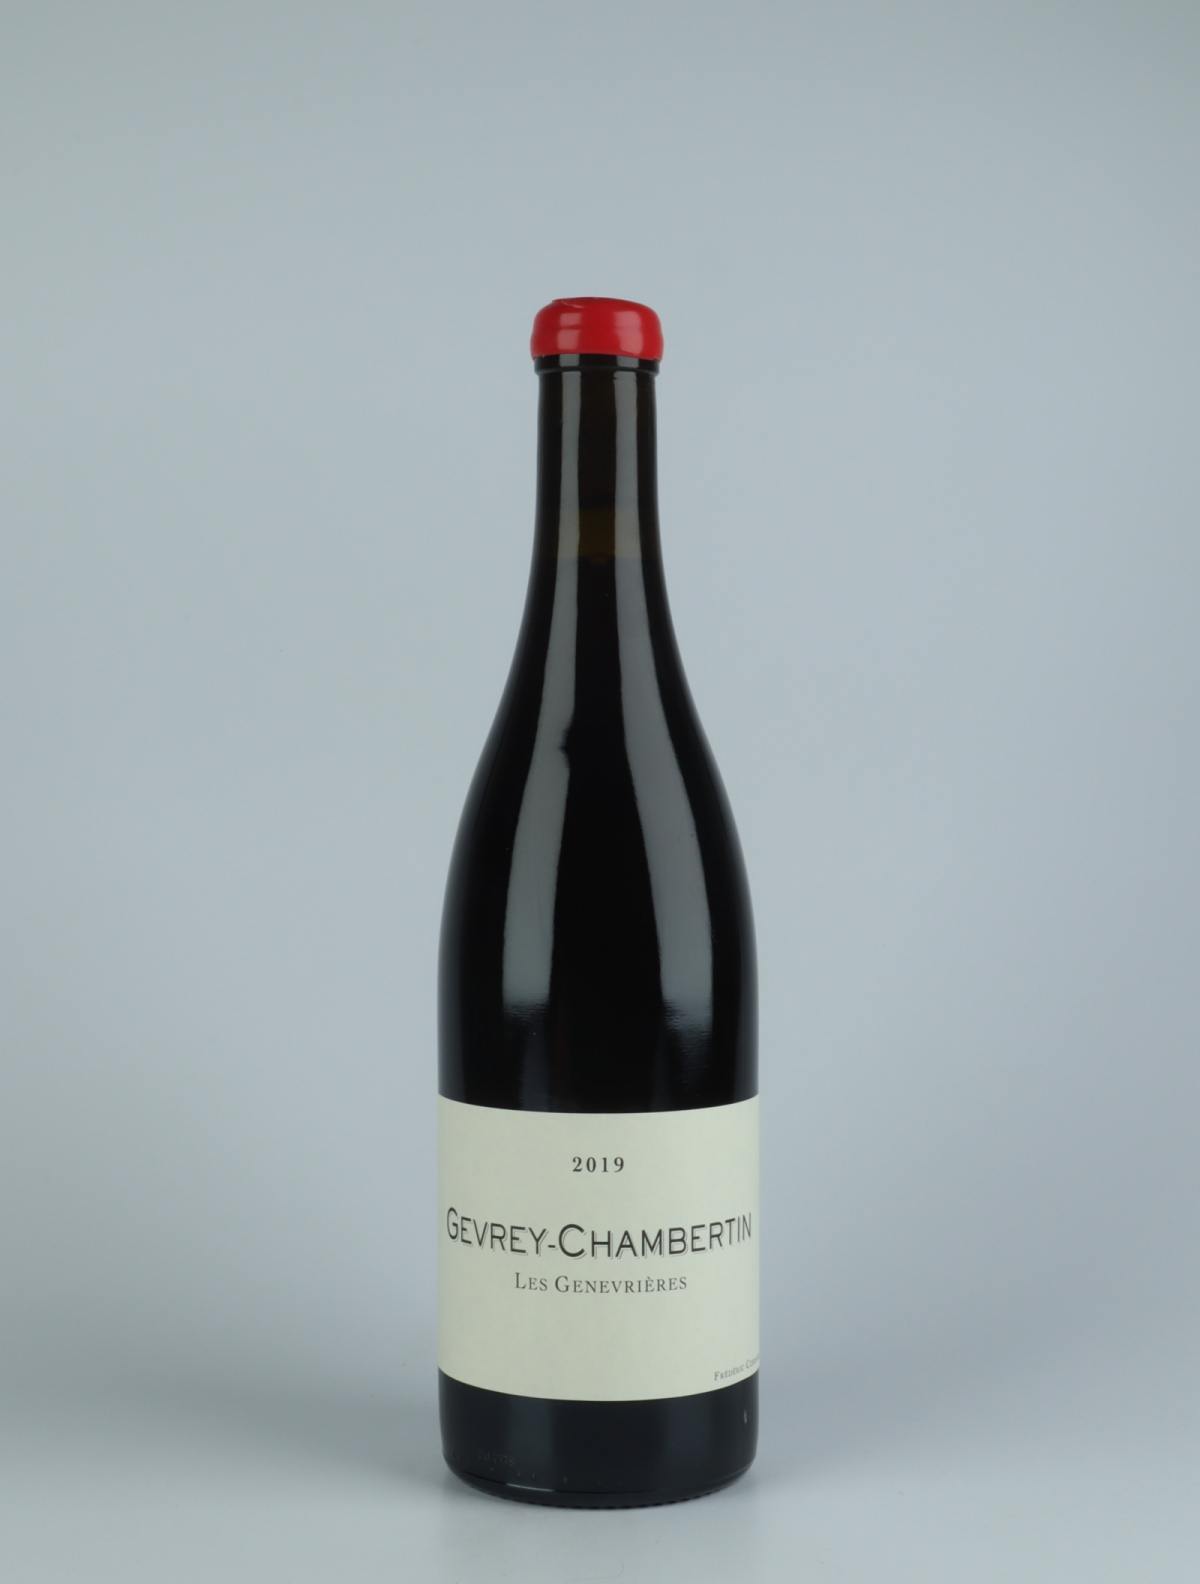 A bottle 2019 Gevrey Chambertin - Les Genevrières - Qvevris Red wine from Frédéric Cossard, Burgundy in France